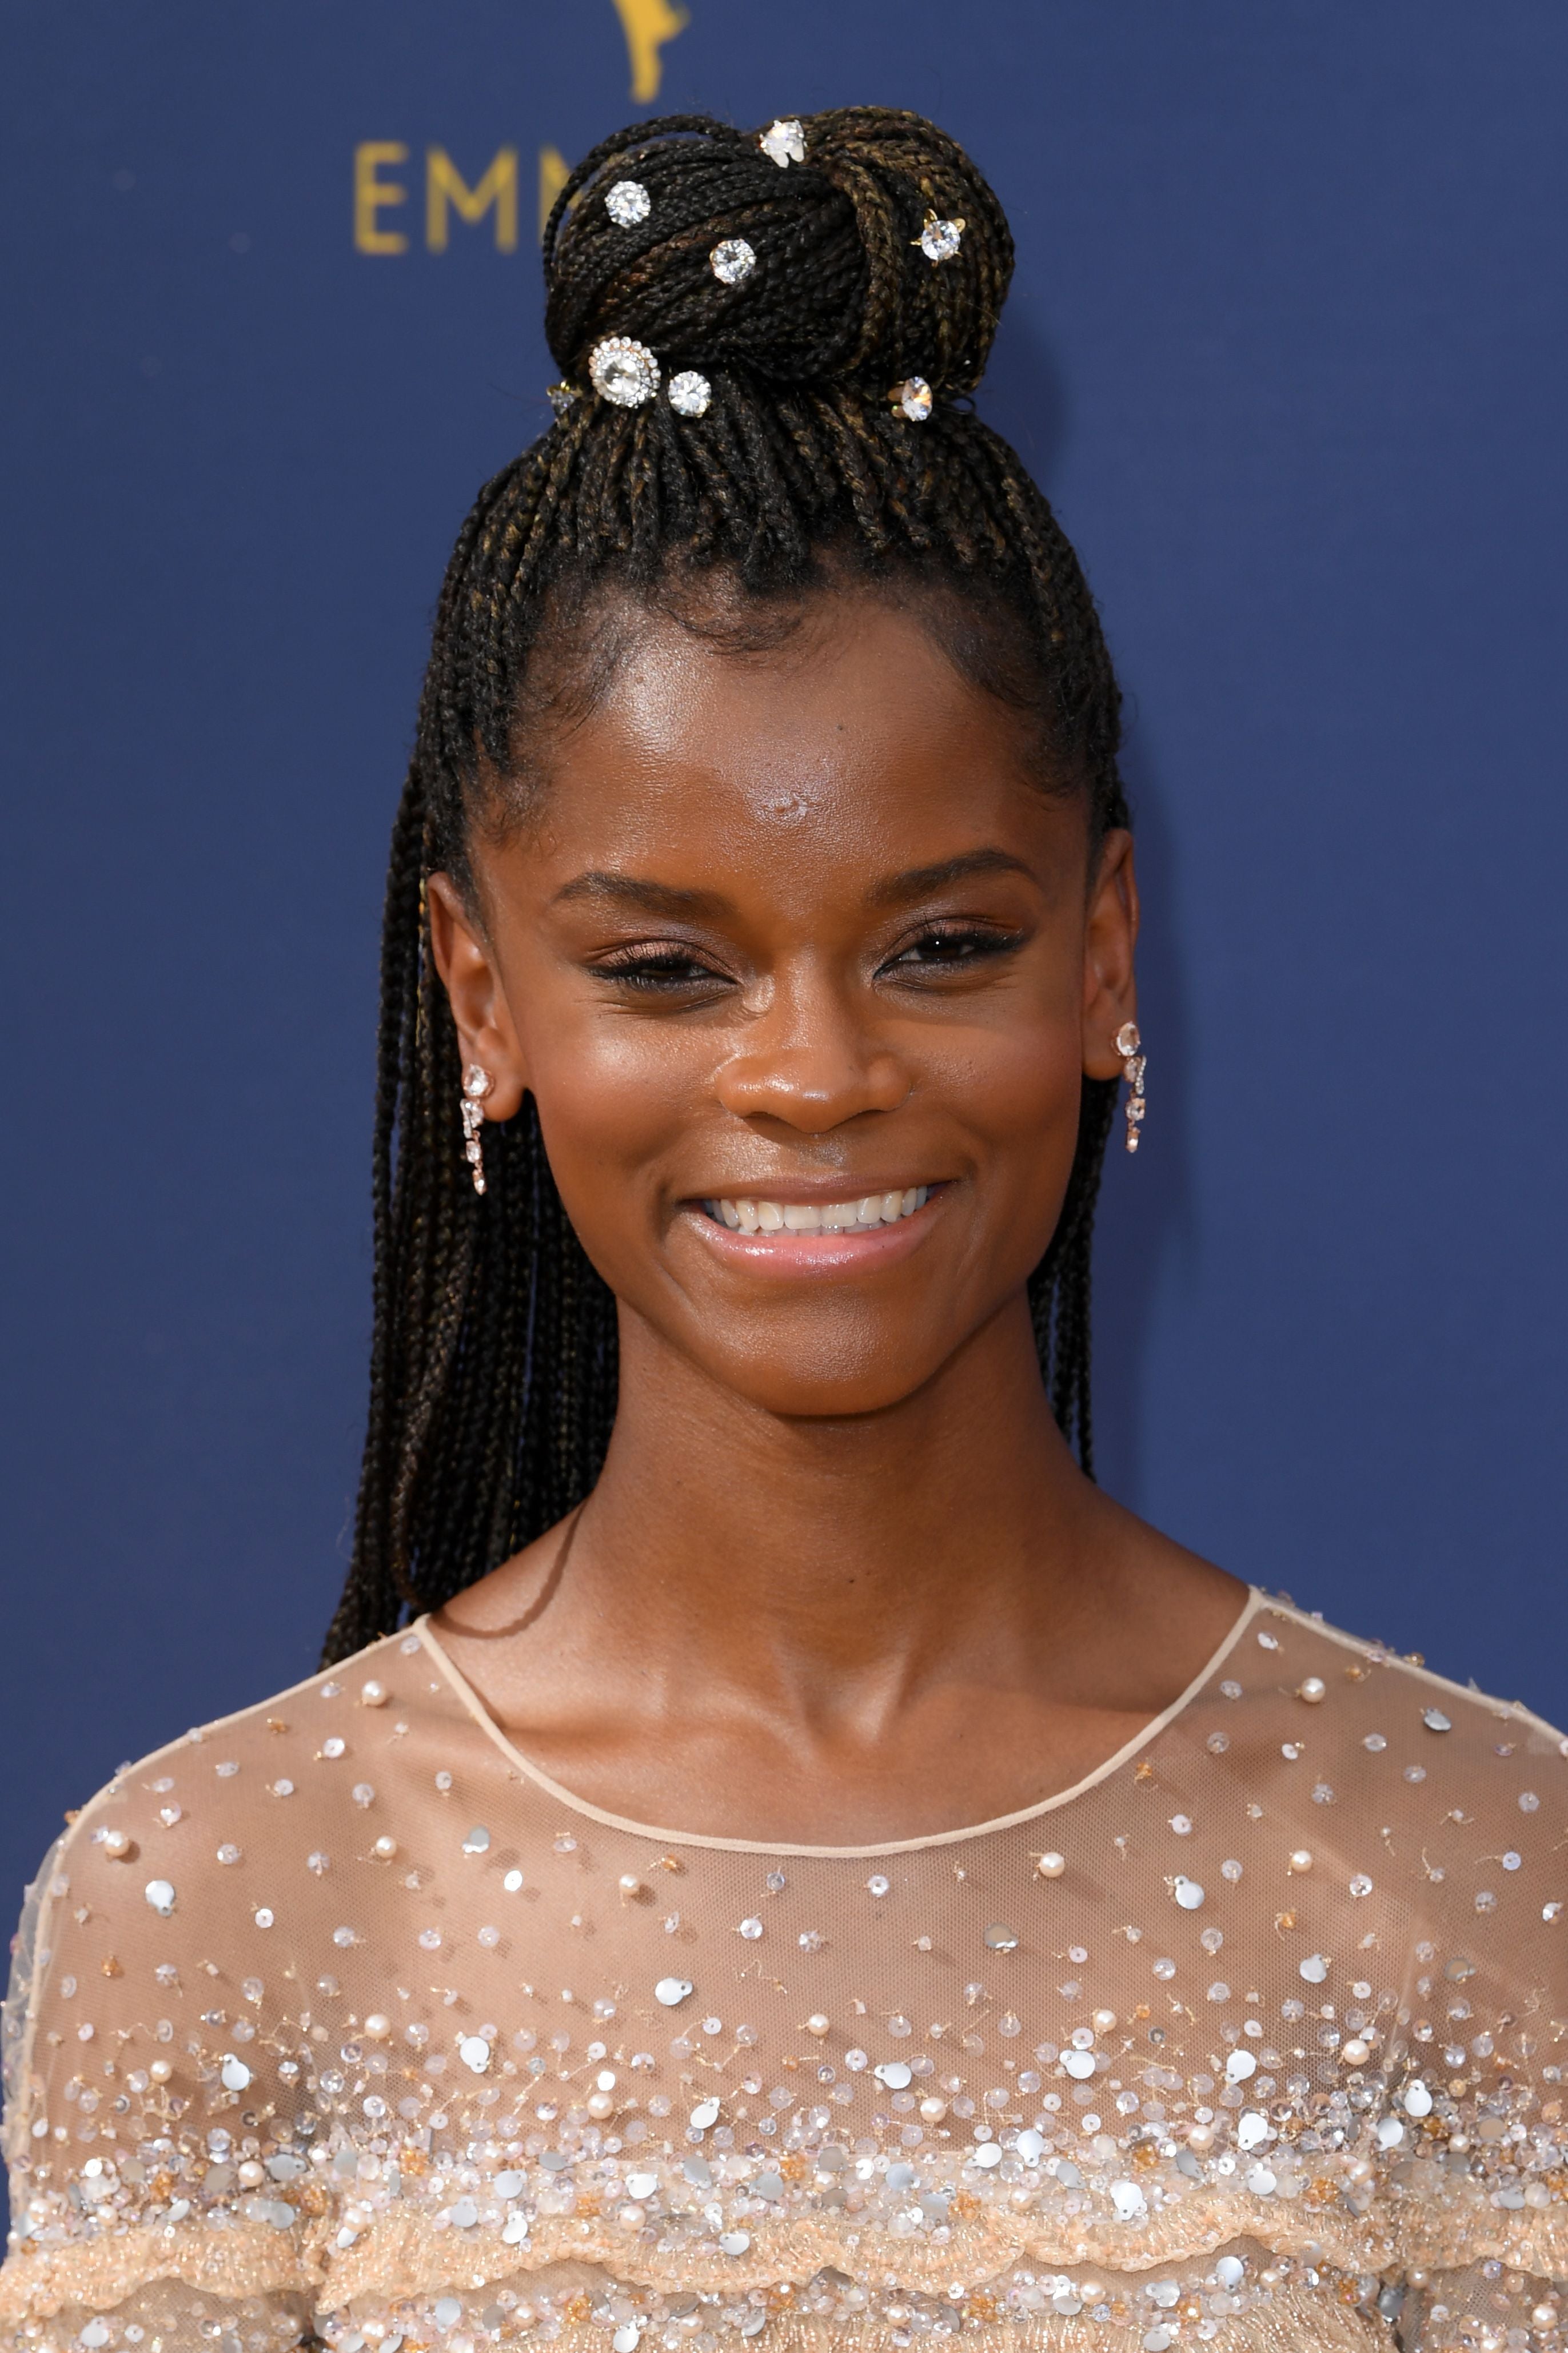 Letitia Wright To Star In U.S. Remake Of French Comedy ‘Le Brio’ Produced by John Legend